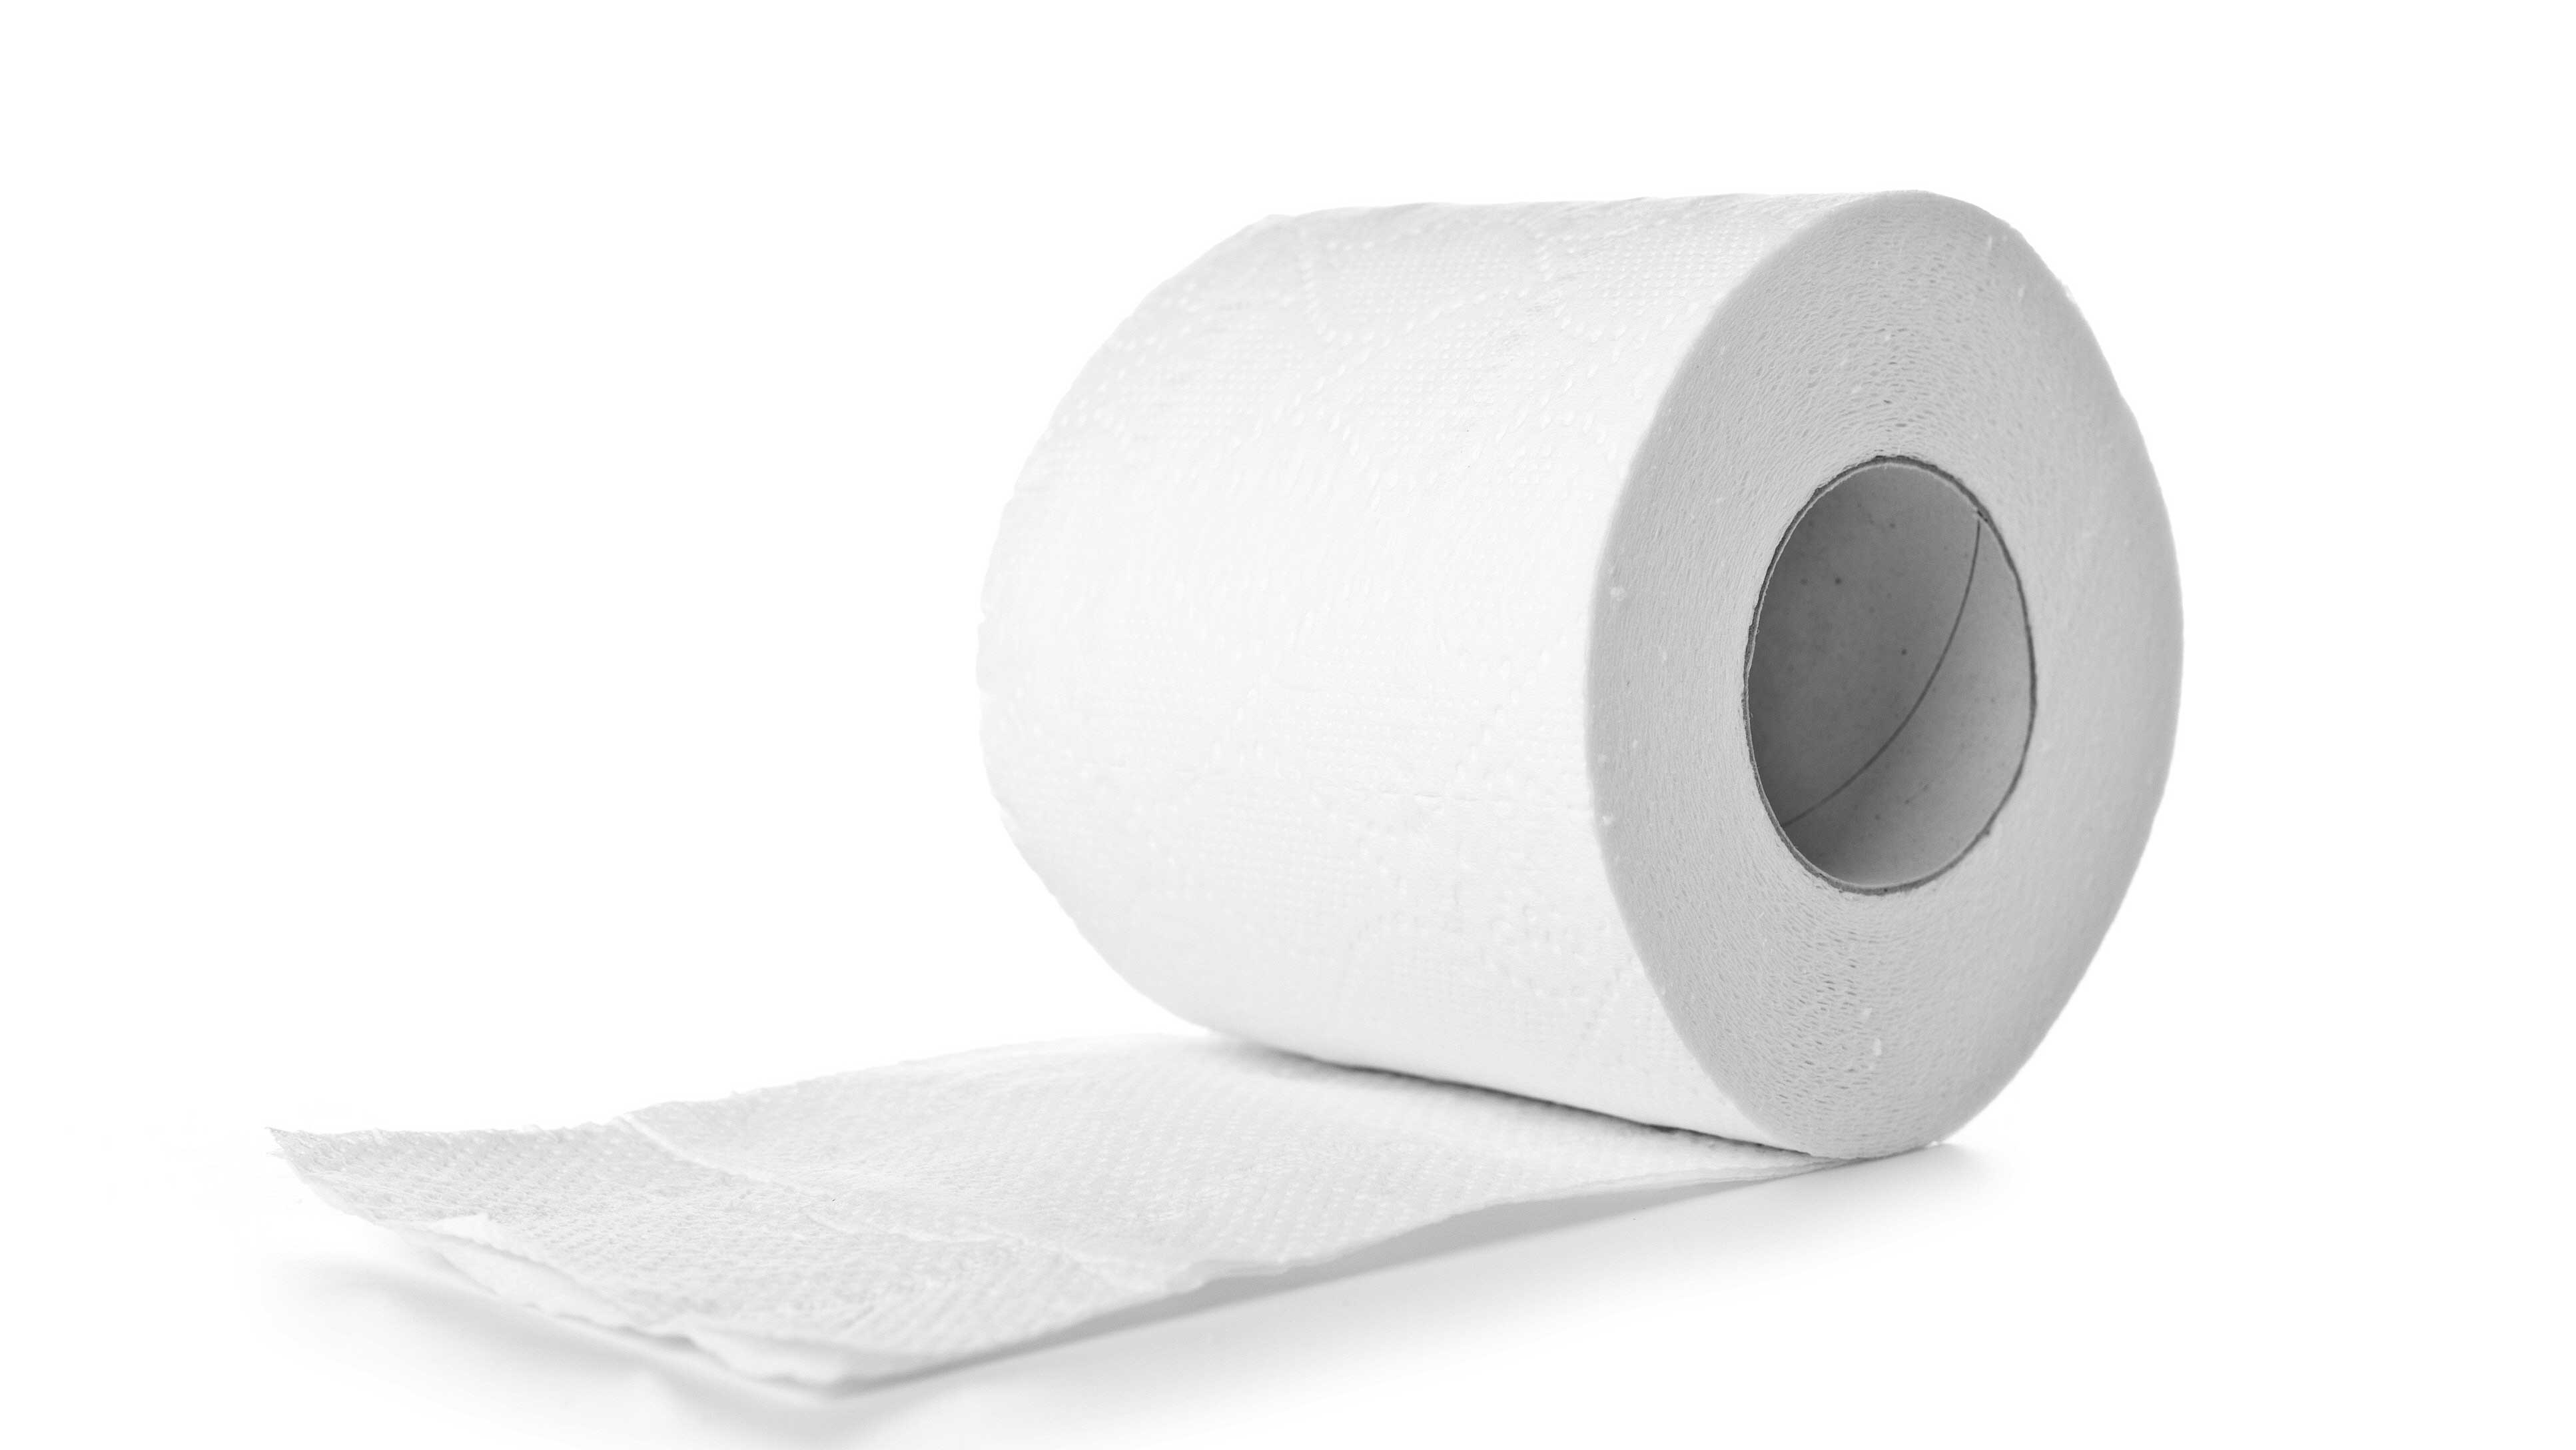 Toilet Paper Roll Penis Test